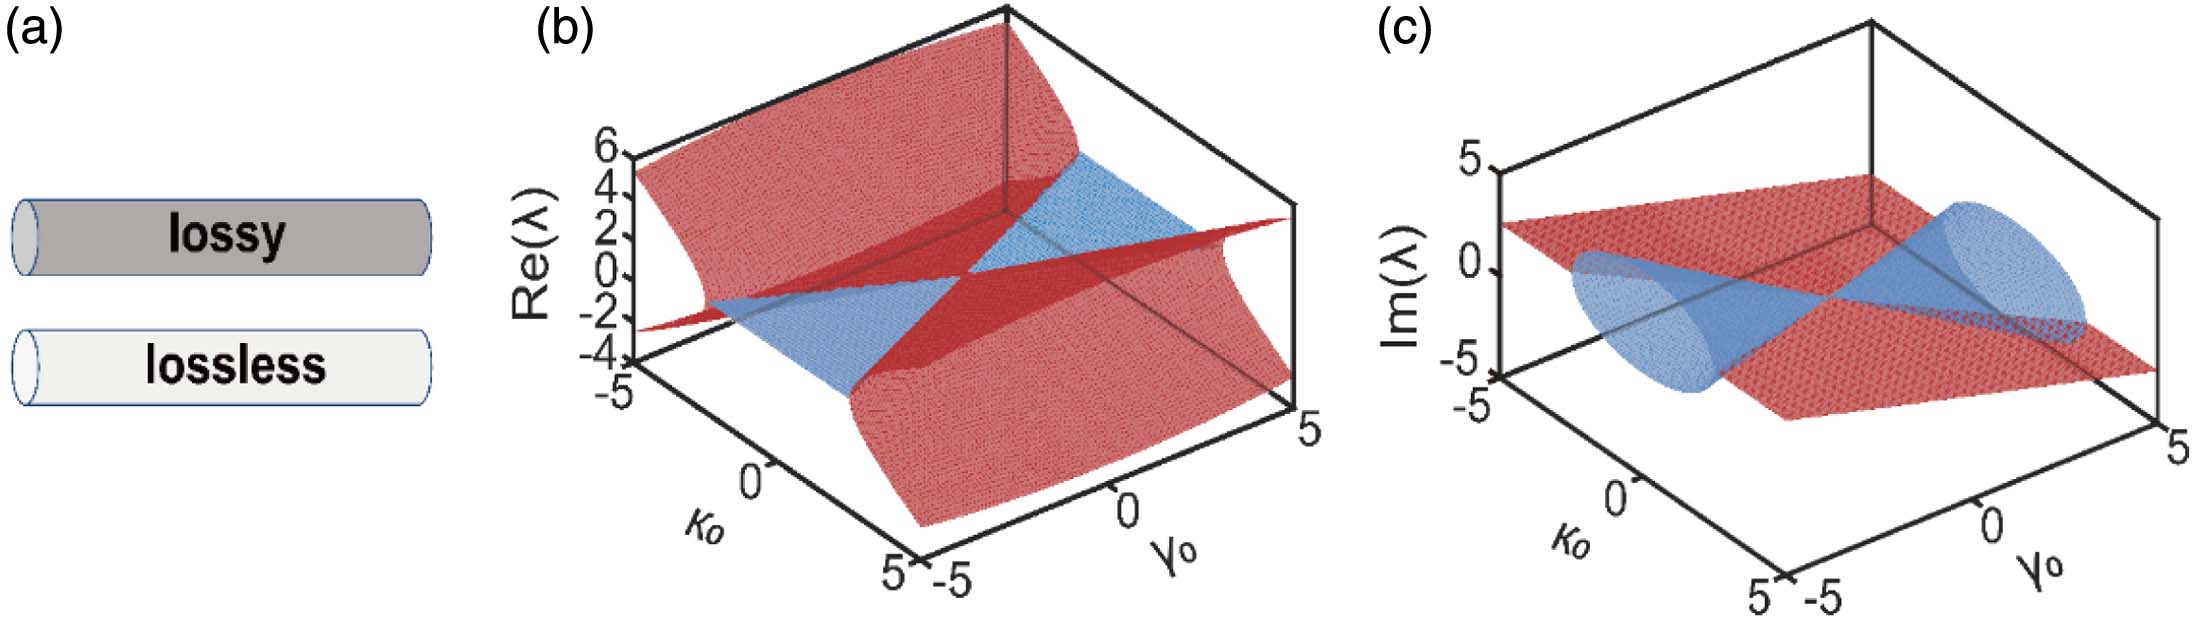 Coupled-waveguides system with its representation of the complex eigenvalues as Riemannian surfaces. (a) Two coupled waveguides, as lossless and lossy ones, respectively, form an integrated system that possesses a Hamiltonian H0. (b), (c) Riemannian surfaces of the complex eigenvalues [real (b) and imaginary (c) parts] of the matrix H0 versus the (κ0,γ0) parameters, where the blue regions represent PT-broken and red ones are PT-symmetric regions. In addition, the boundary is considered as lines of EPs. Notably, these Riemannian surfaces contain the PT-symmetric coupled subsystem and decaying subsystem for a realistic manifestation. The existence of a decaying subsystem causes a tilt angle for the surface in (c).